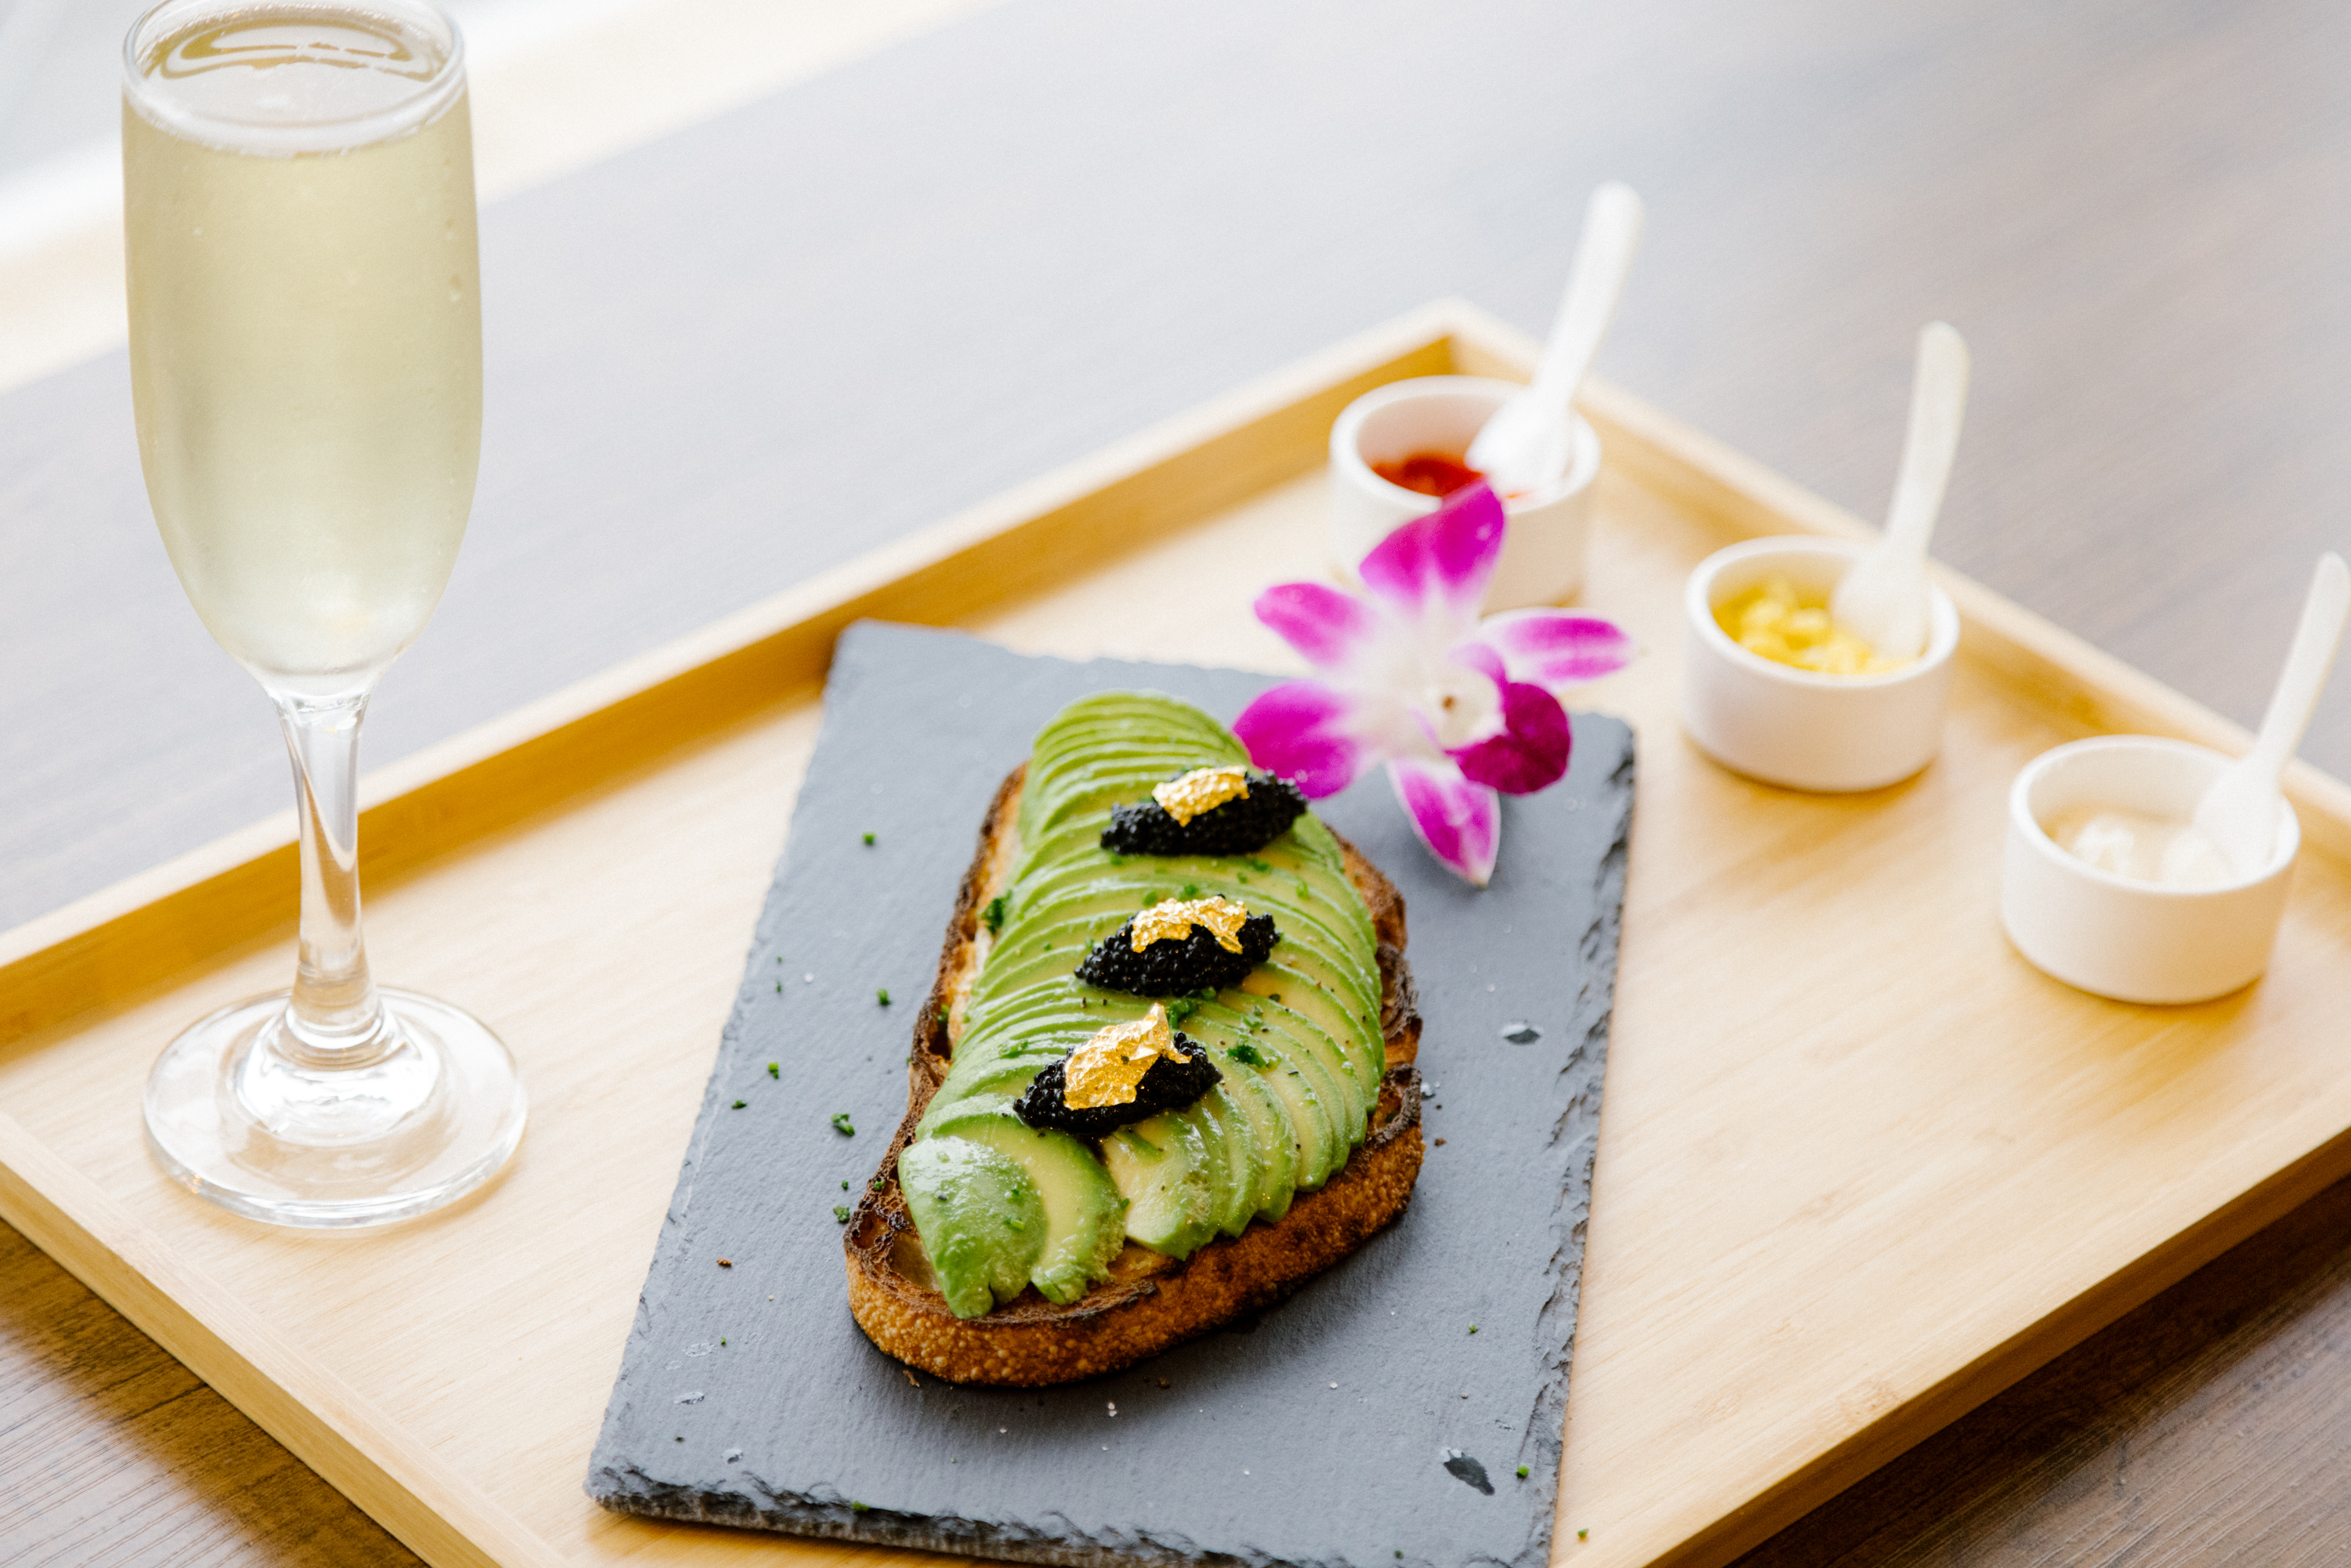 A slice of avocado toast with caviar and gold leaf on top sits on a tray with a glass of champagne and condiments.